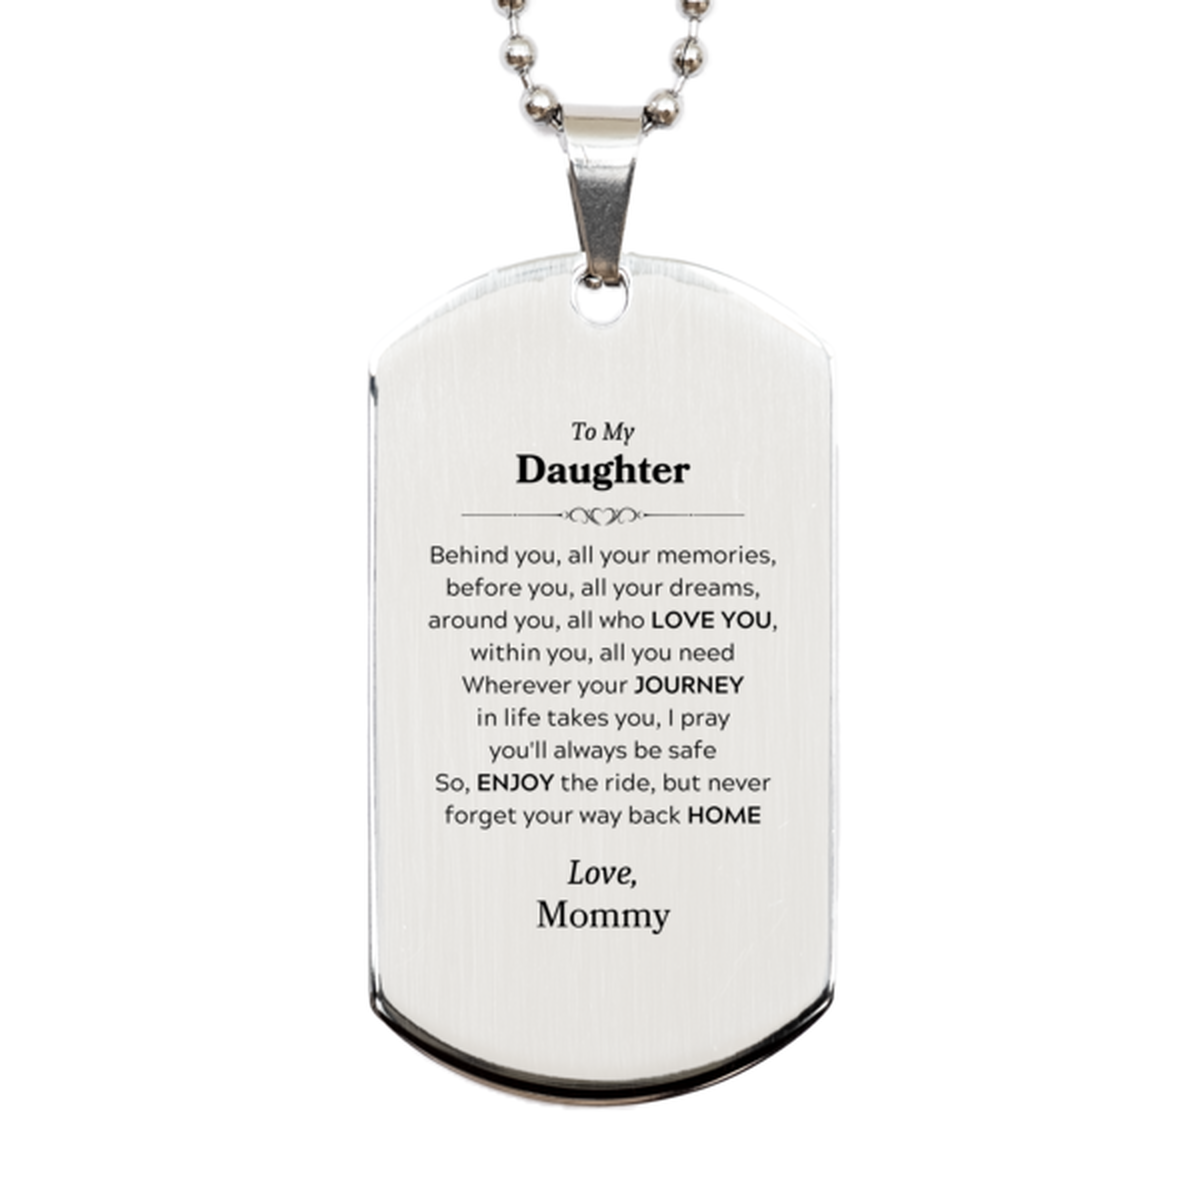 To My Daughter Graduation Gifts from Mommy, Daughter Silver Dog Tag Christmas Birthday Gifts for Daughter Behind you, all your memories, before you, all your dreams. Love, Mommy